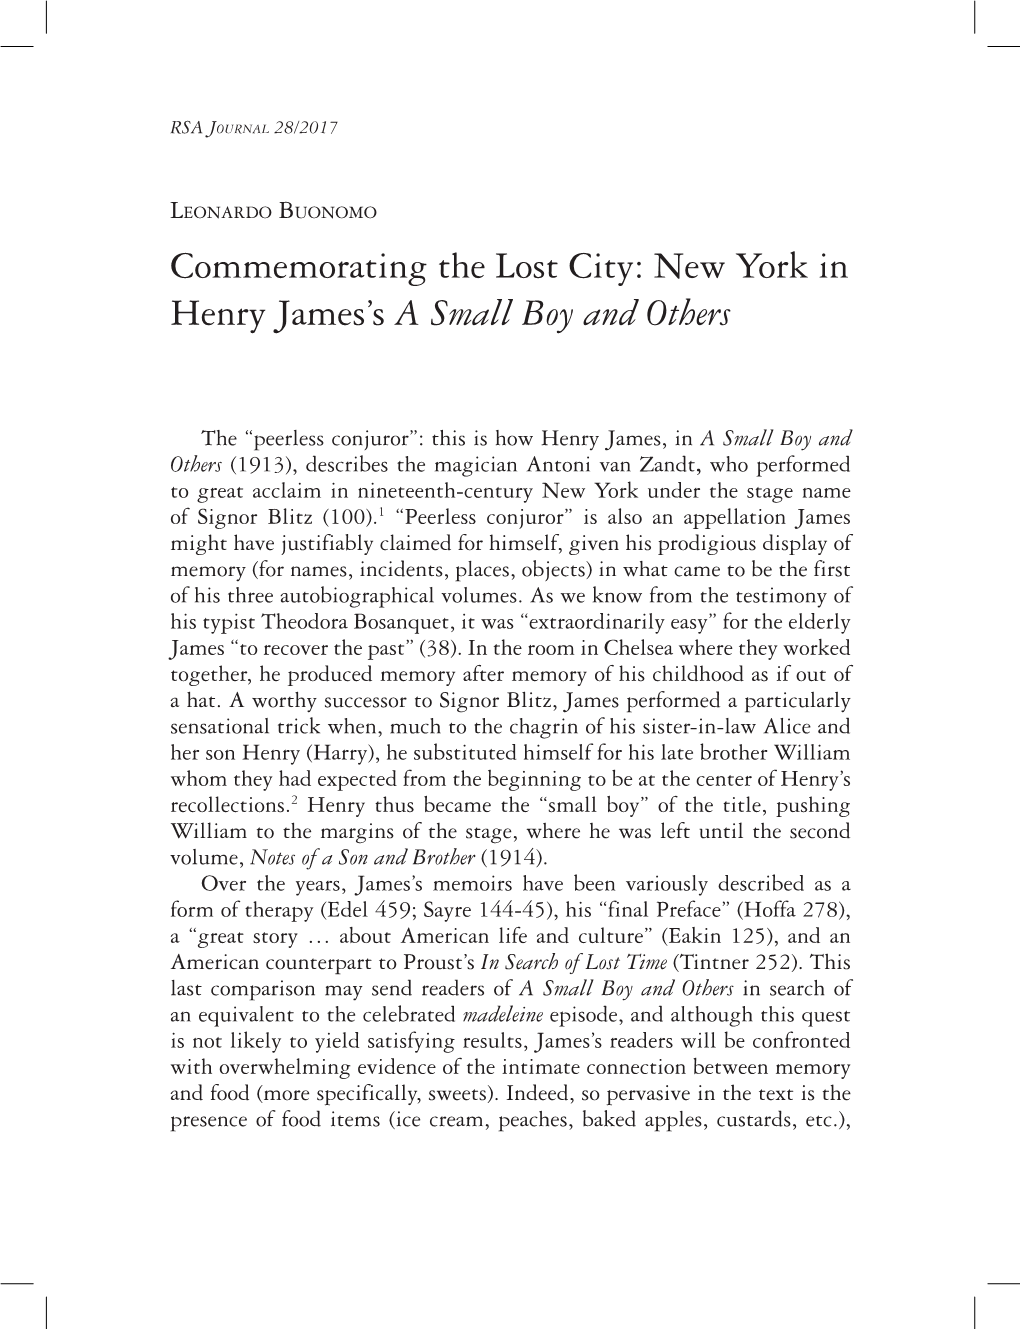 New York in Henry James's a Small Boy and Others